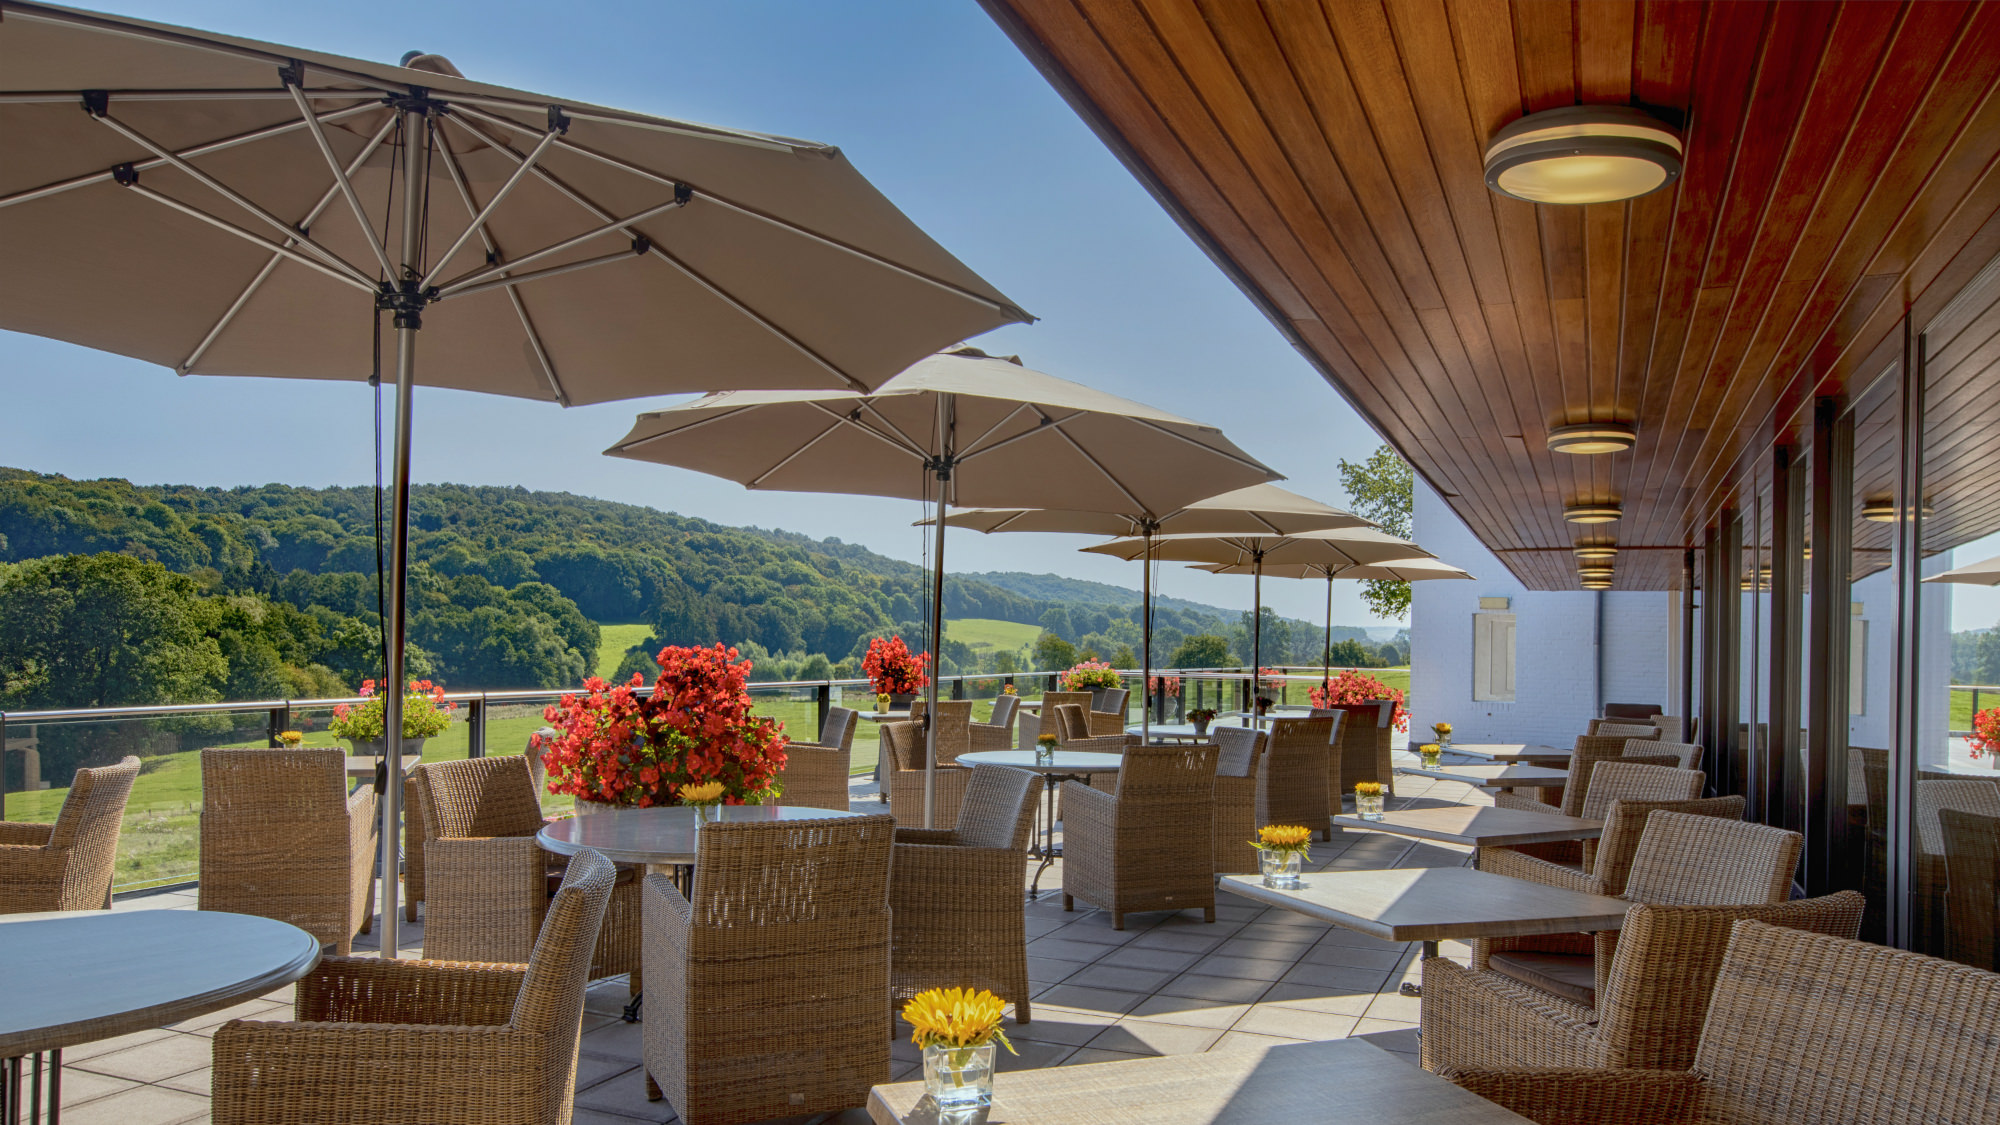 Flowery terrace with a magnificent panorama of the South Limburg hills.